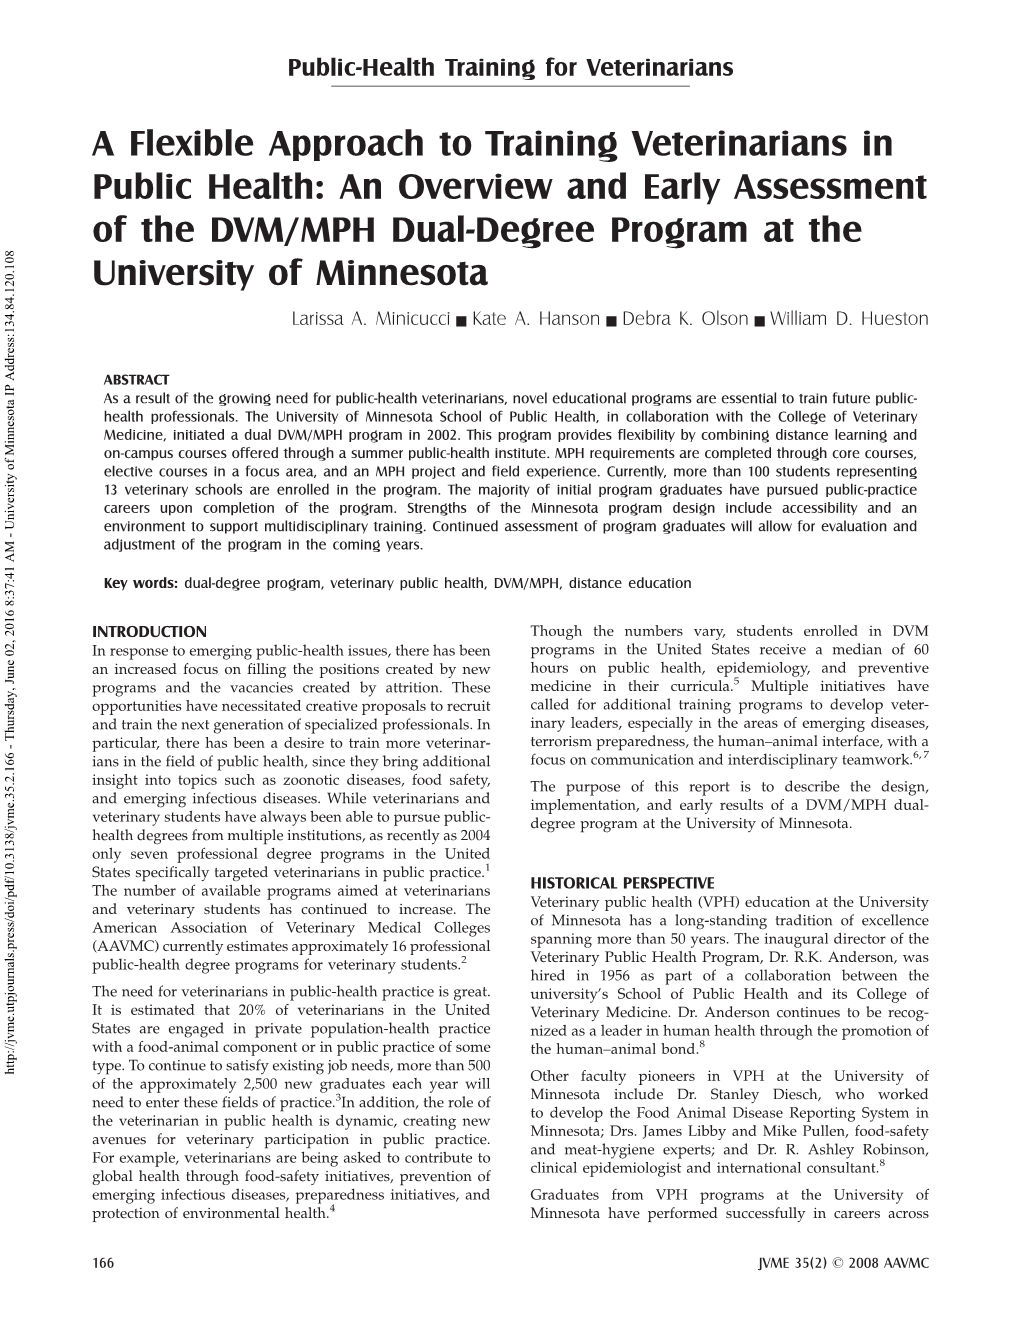 A Flexible Approach to Training Veterinarians in Public Health: an Overview and Early Assessment of the DVM/MPH Dual-Degree Program at the University of Minnesota